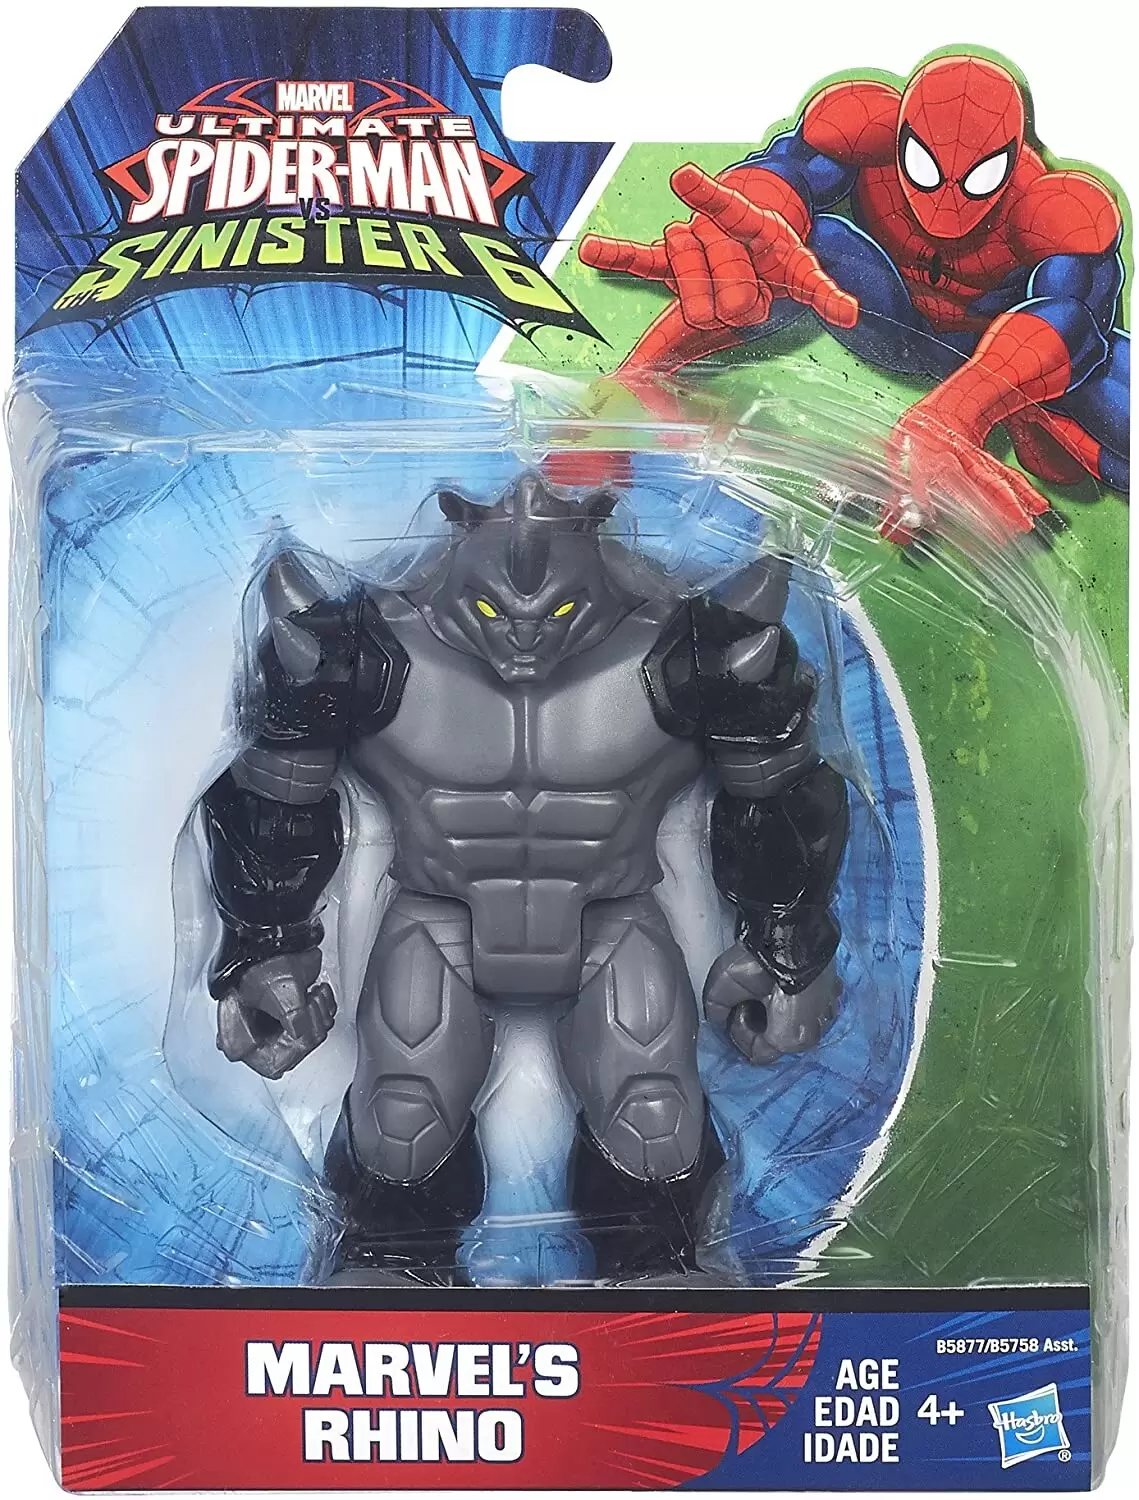 Ultimate Spider-Man Vs The Sinister 6 - Rhino